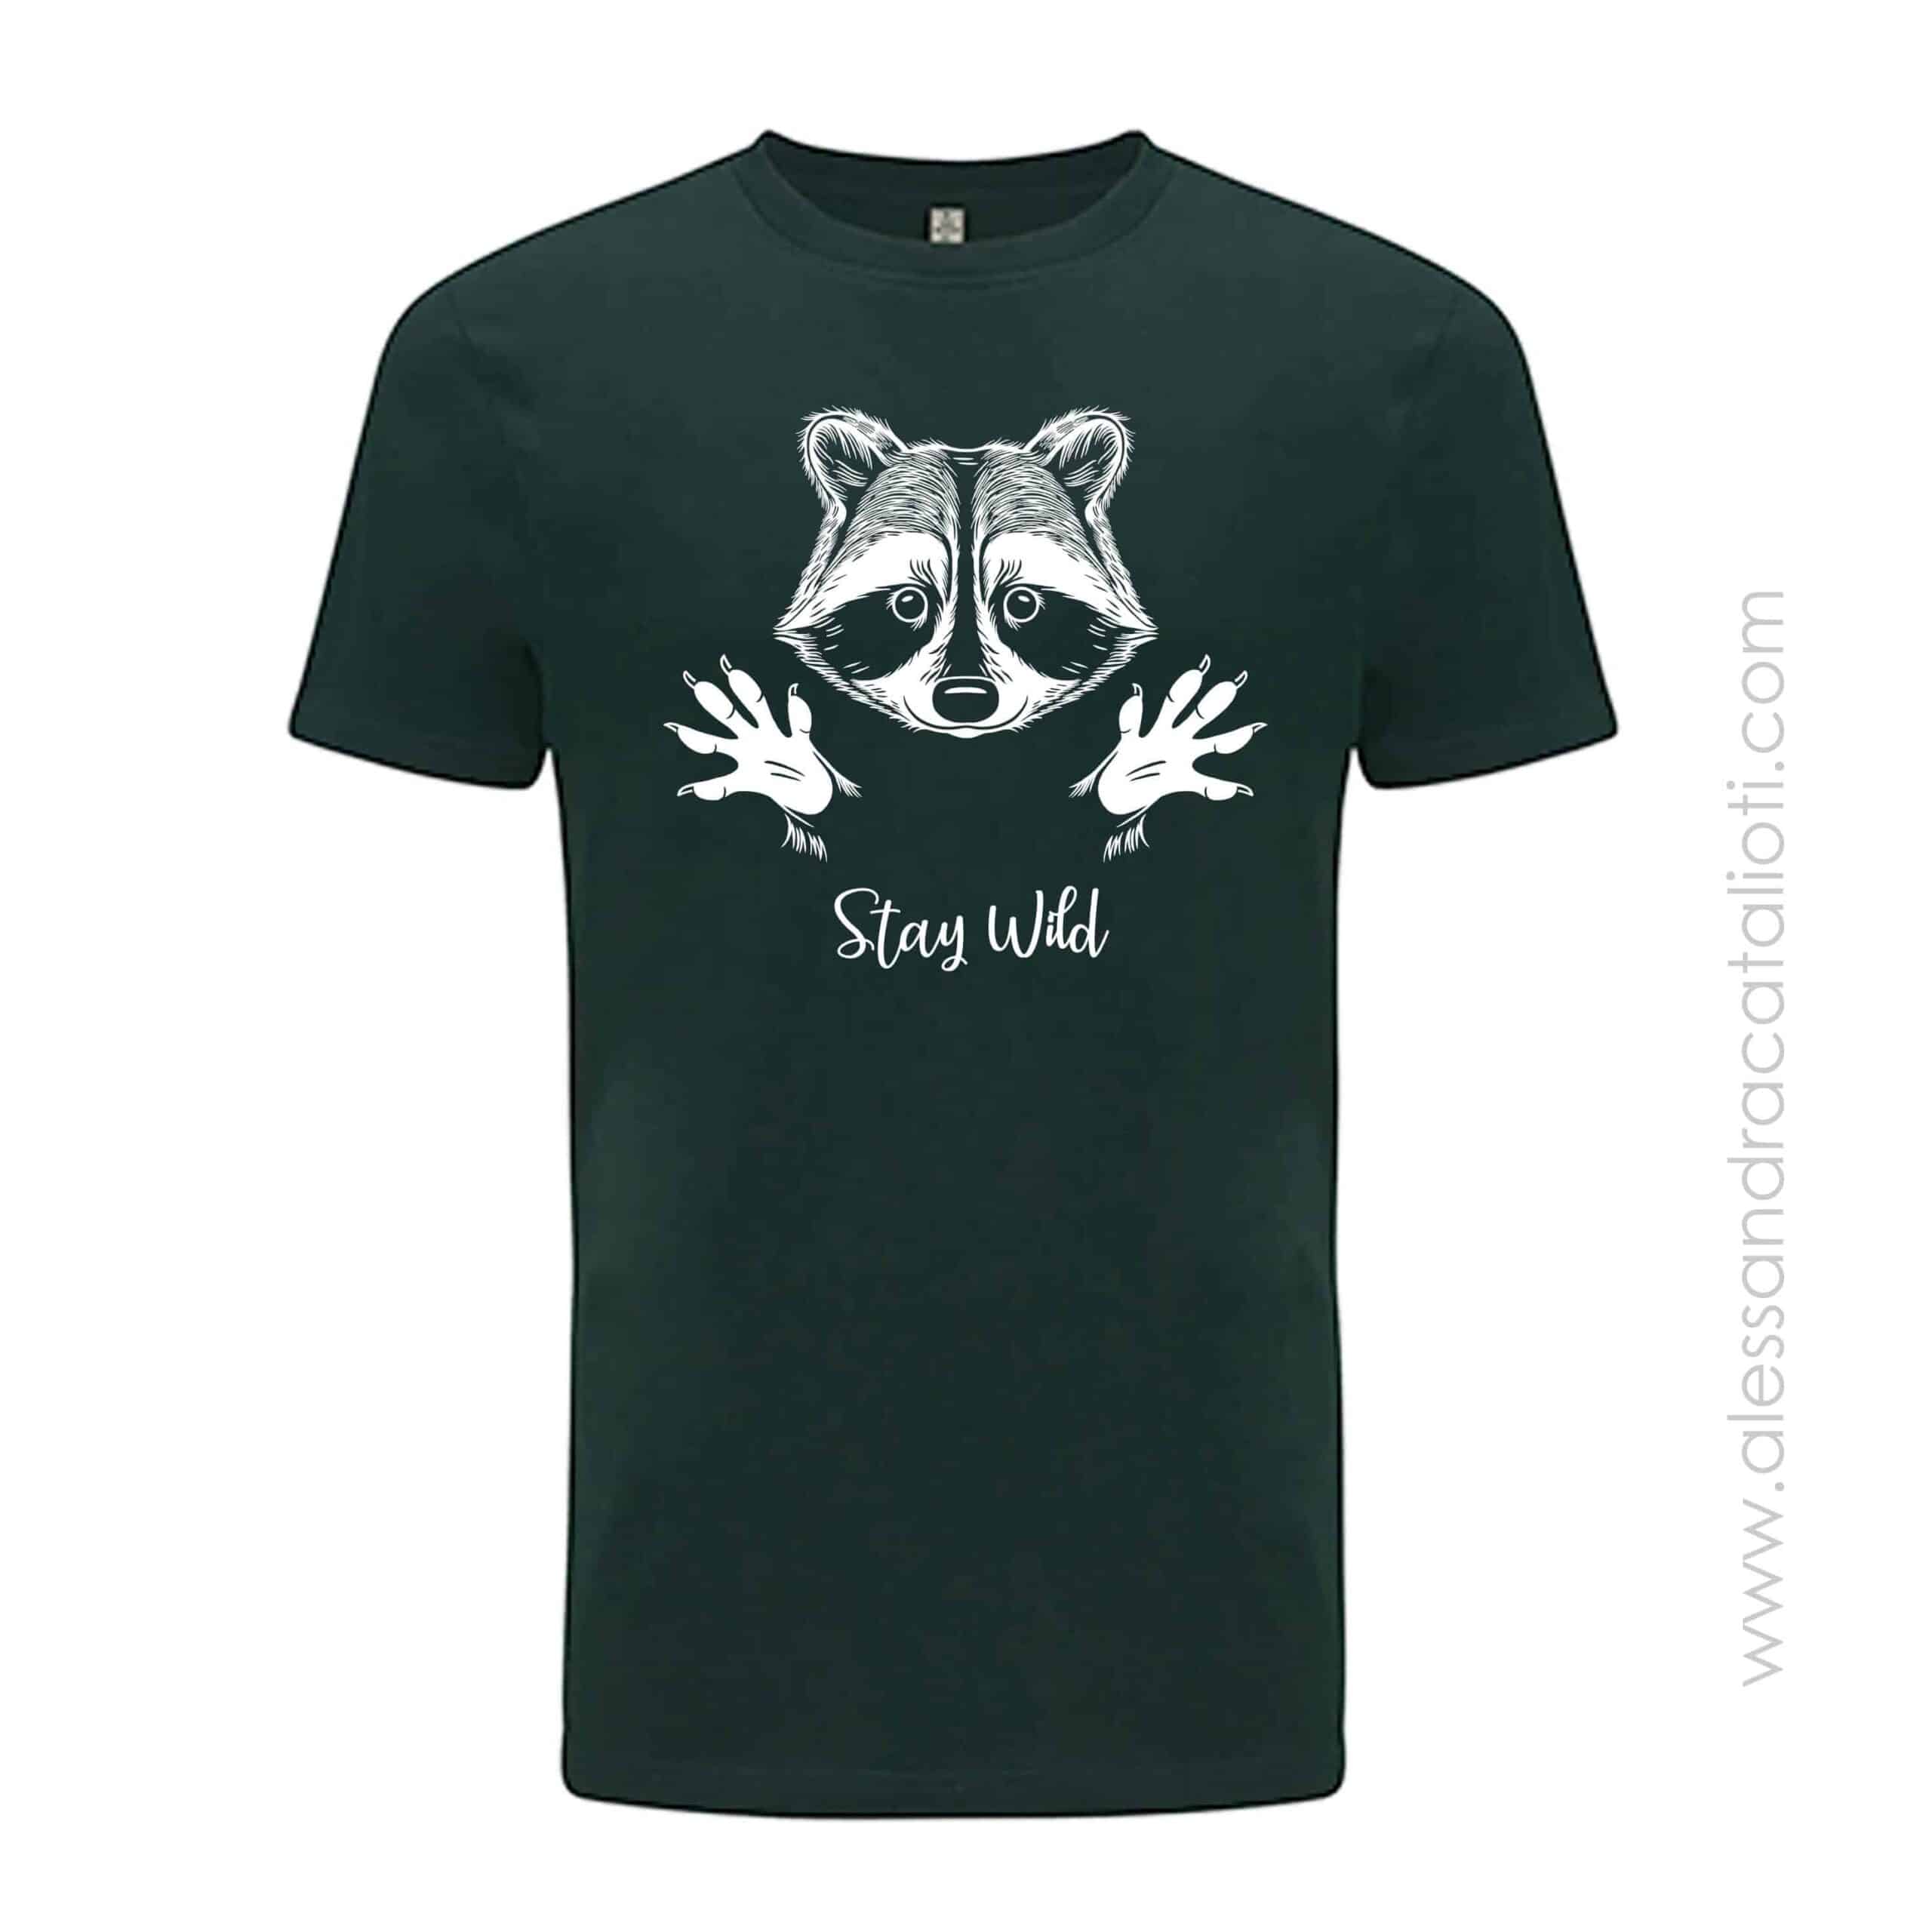 Vegan t-shirt unisex raccoon - made from 100% recycled material